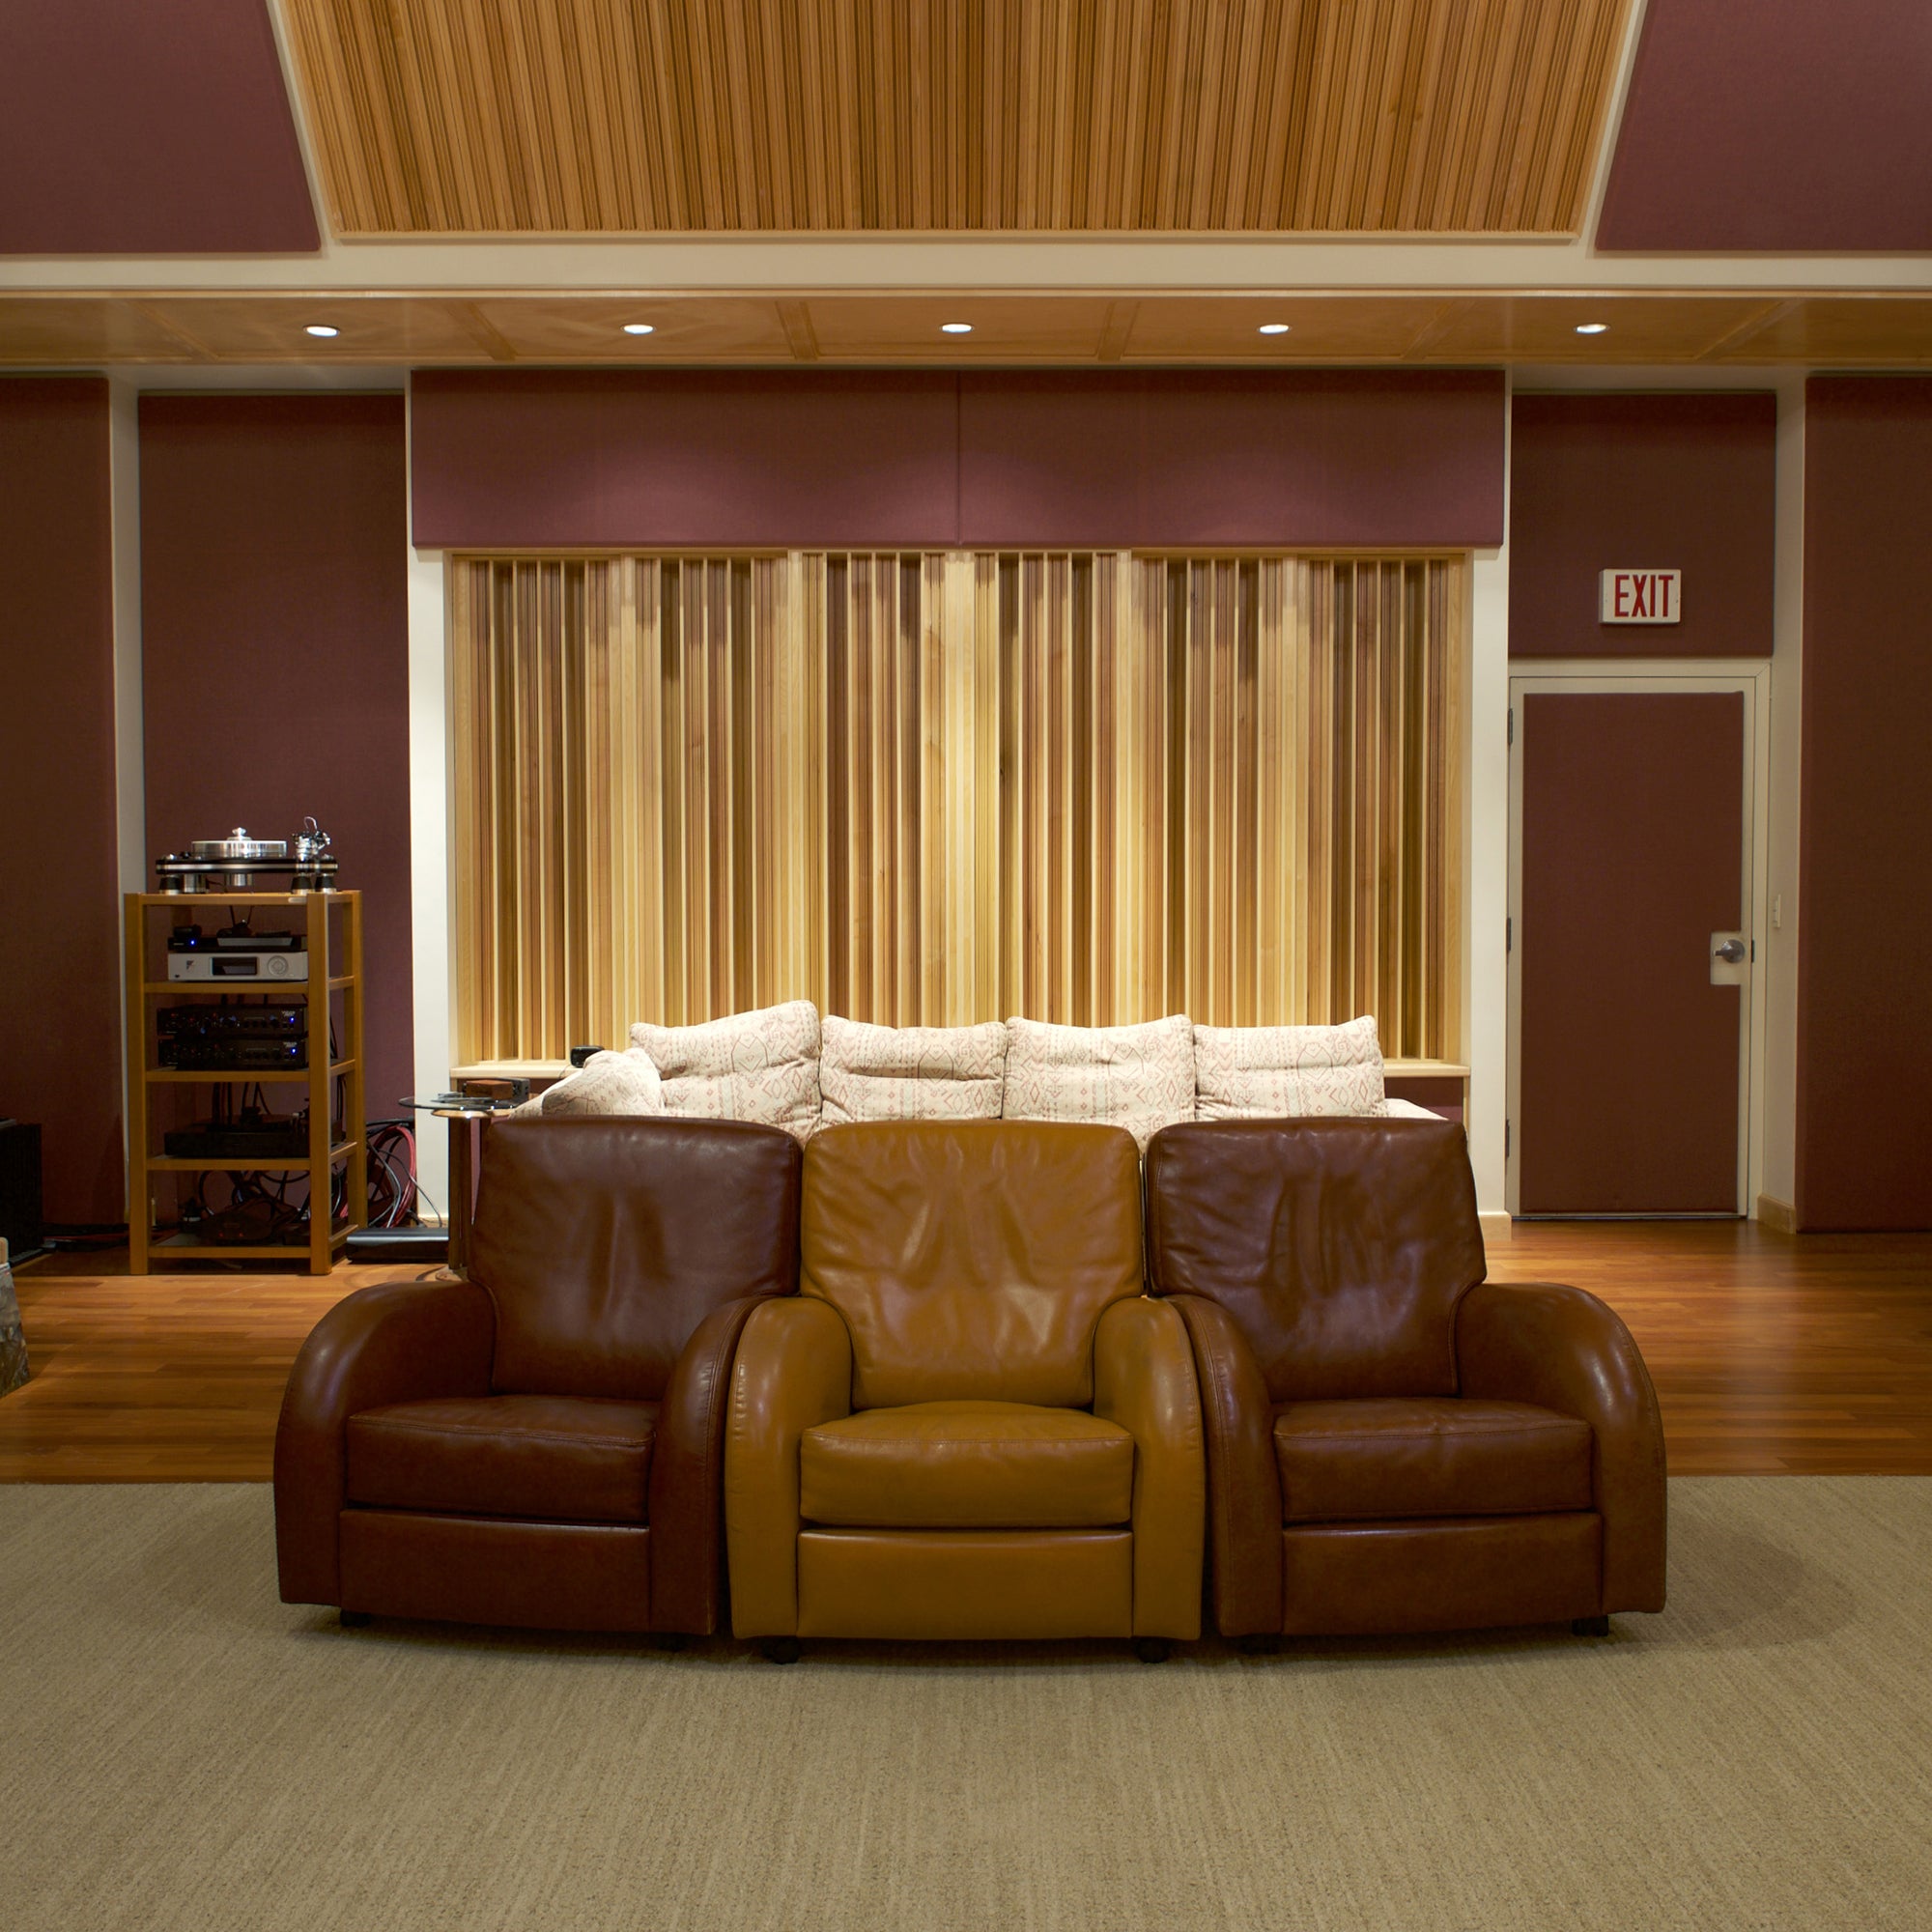 A living room with two leather recliners.